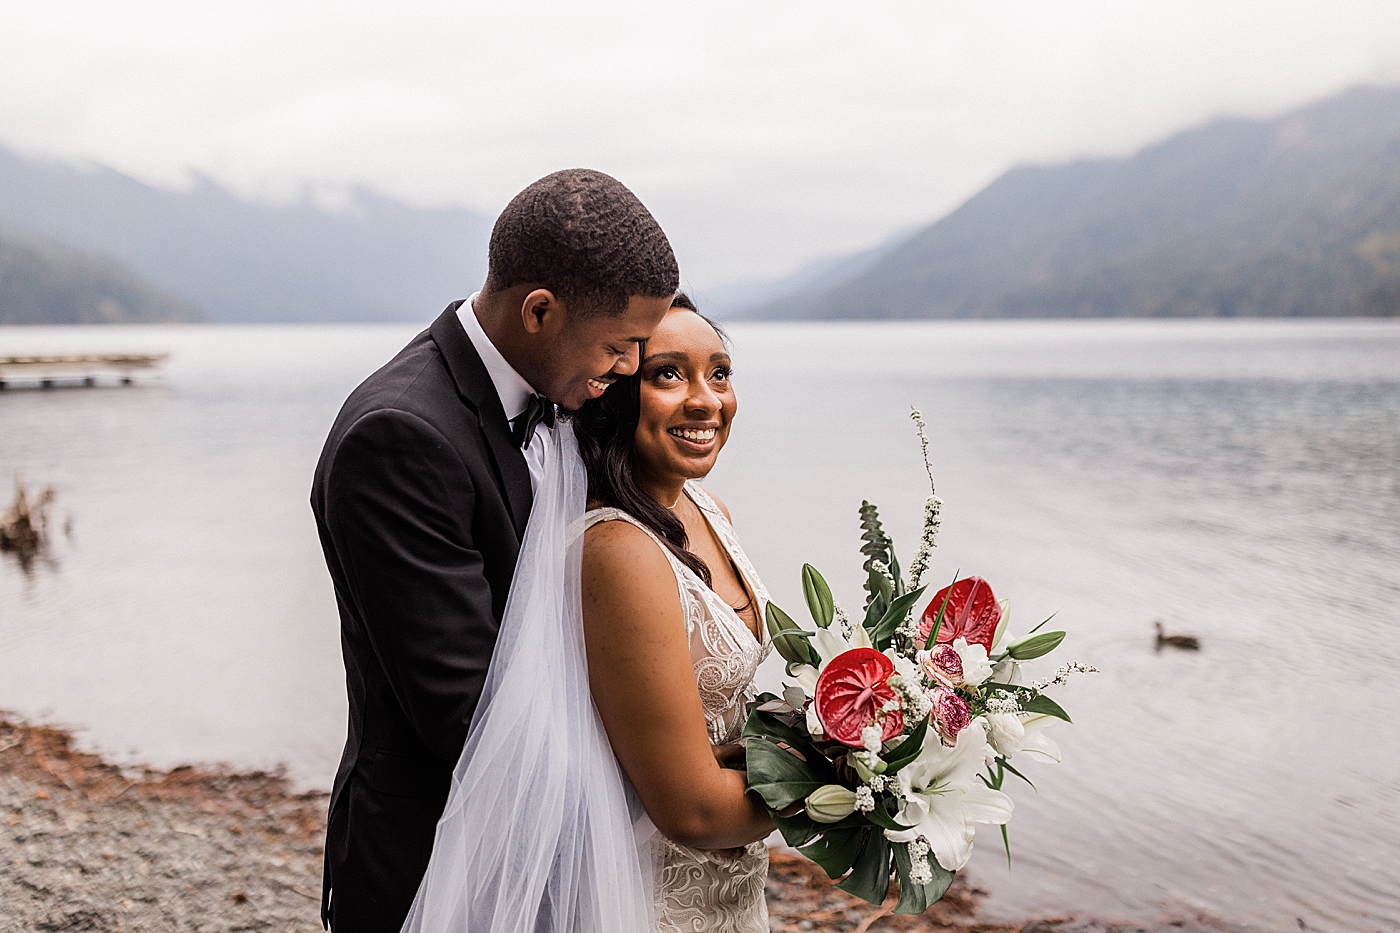 Elopement photos at Lake Crescent with Bride and Groom | Photo by Megan Montalvo Photography